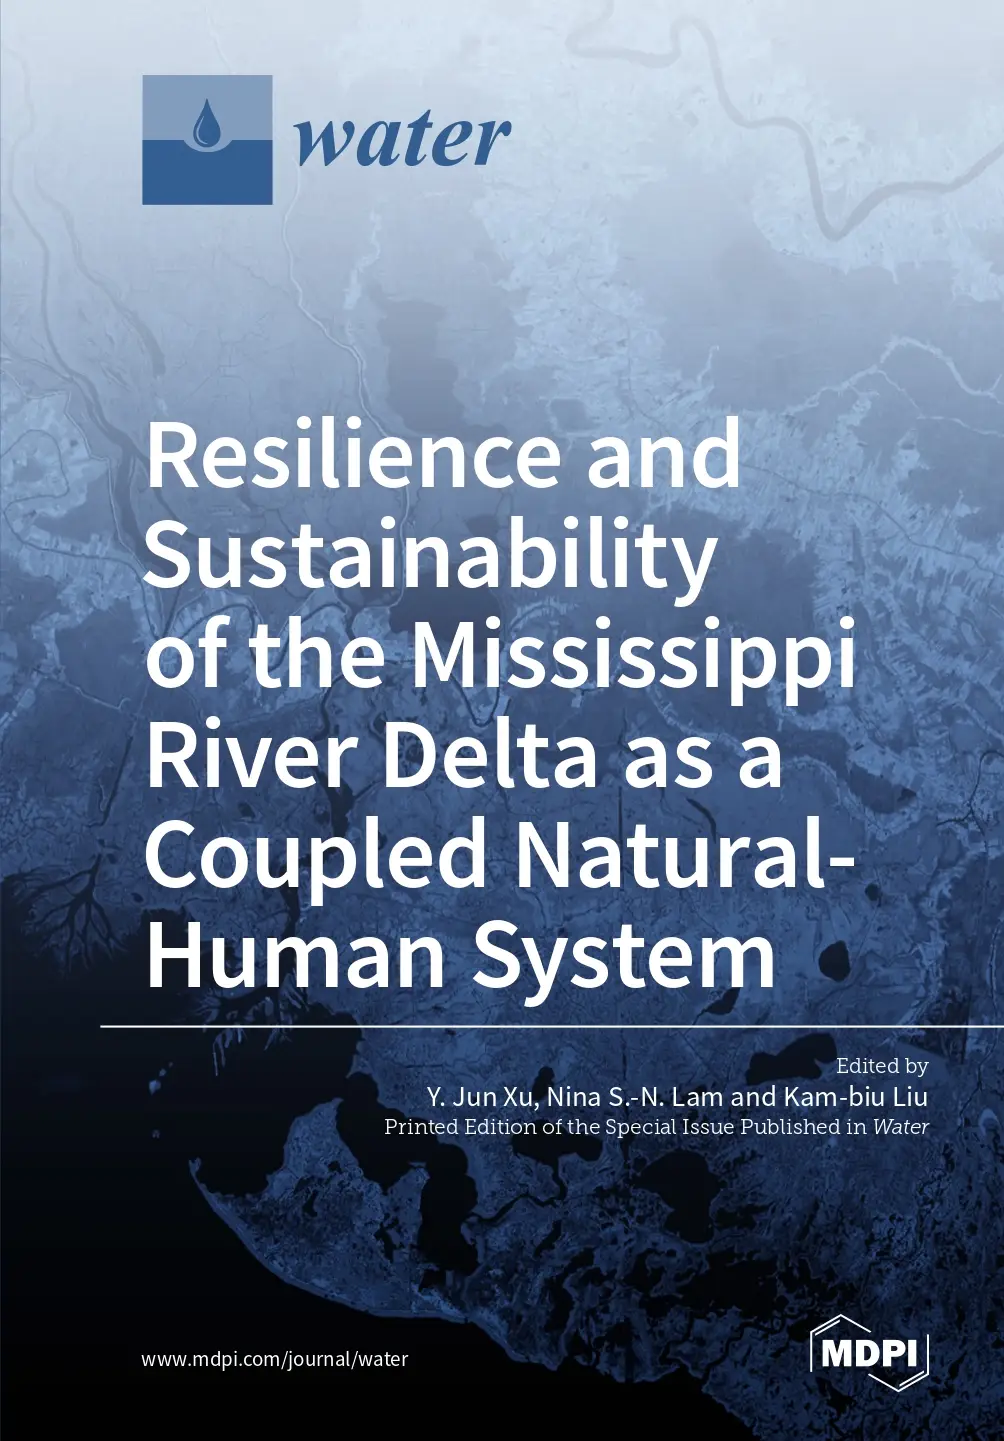 Resilience and Sustainability of the Mississippi River Delta as a Coupled Natural- Human System